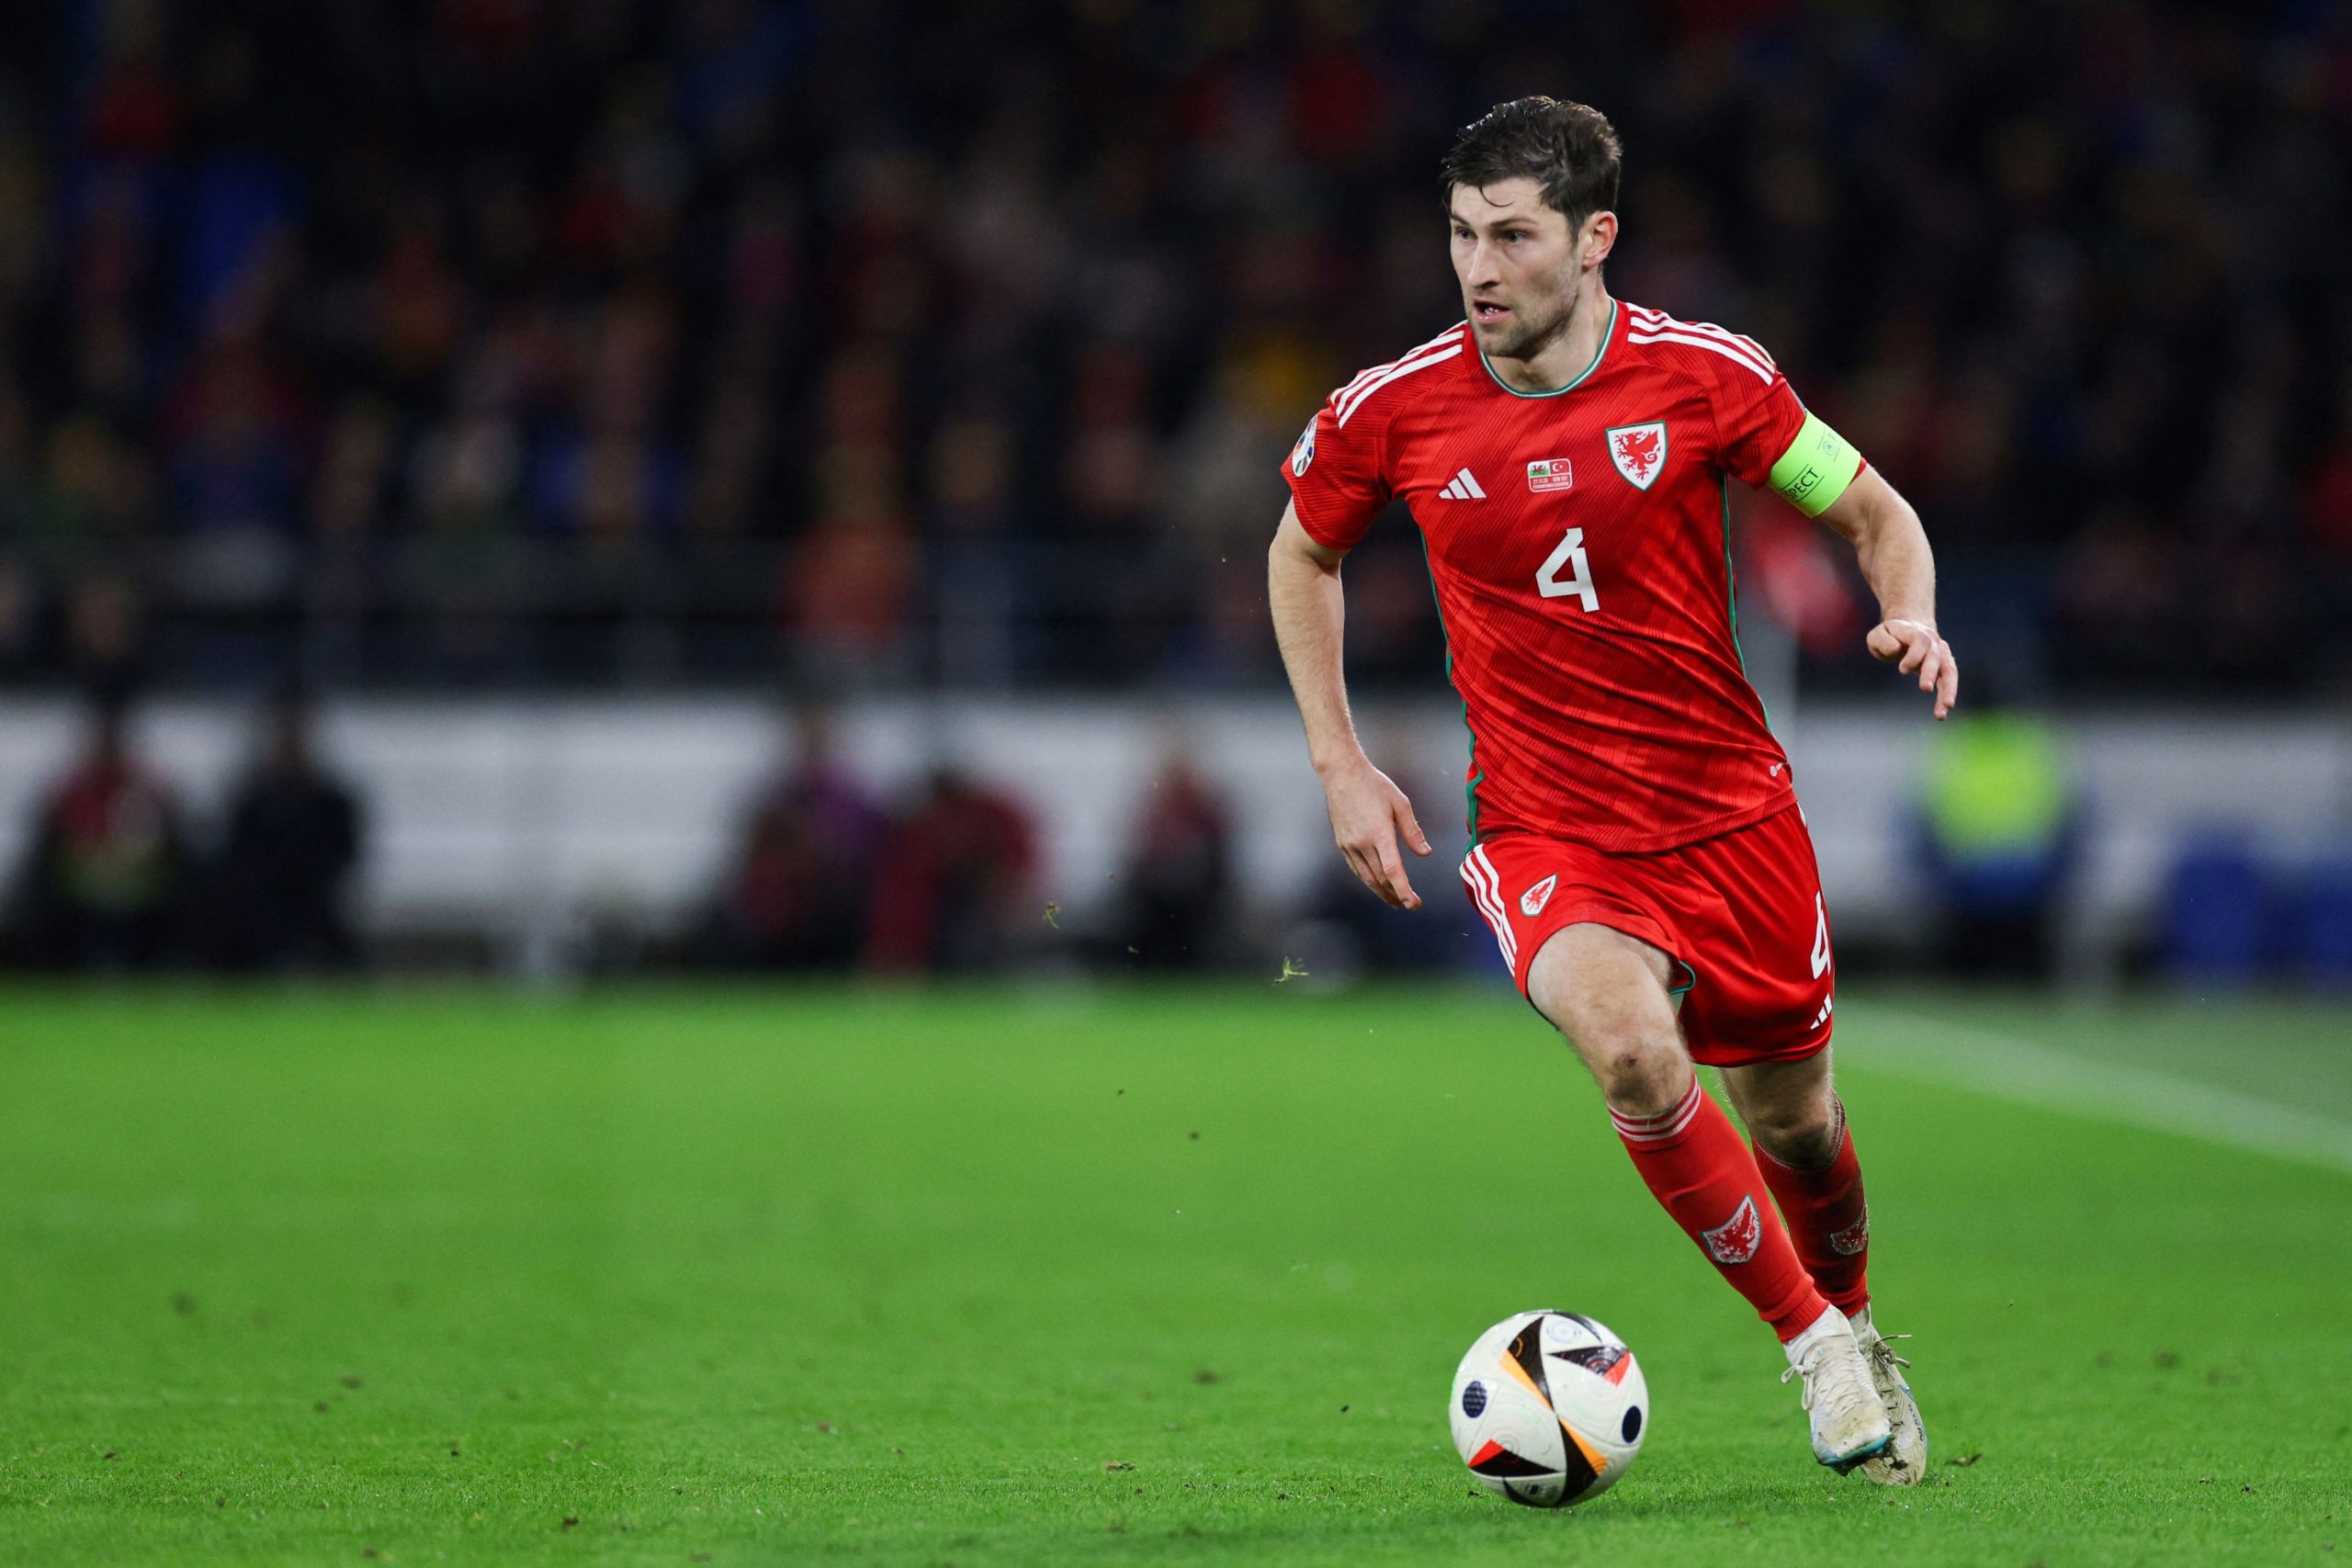 Tottenham defender Ben Davies is a star who continues to revel in being an underdog